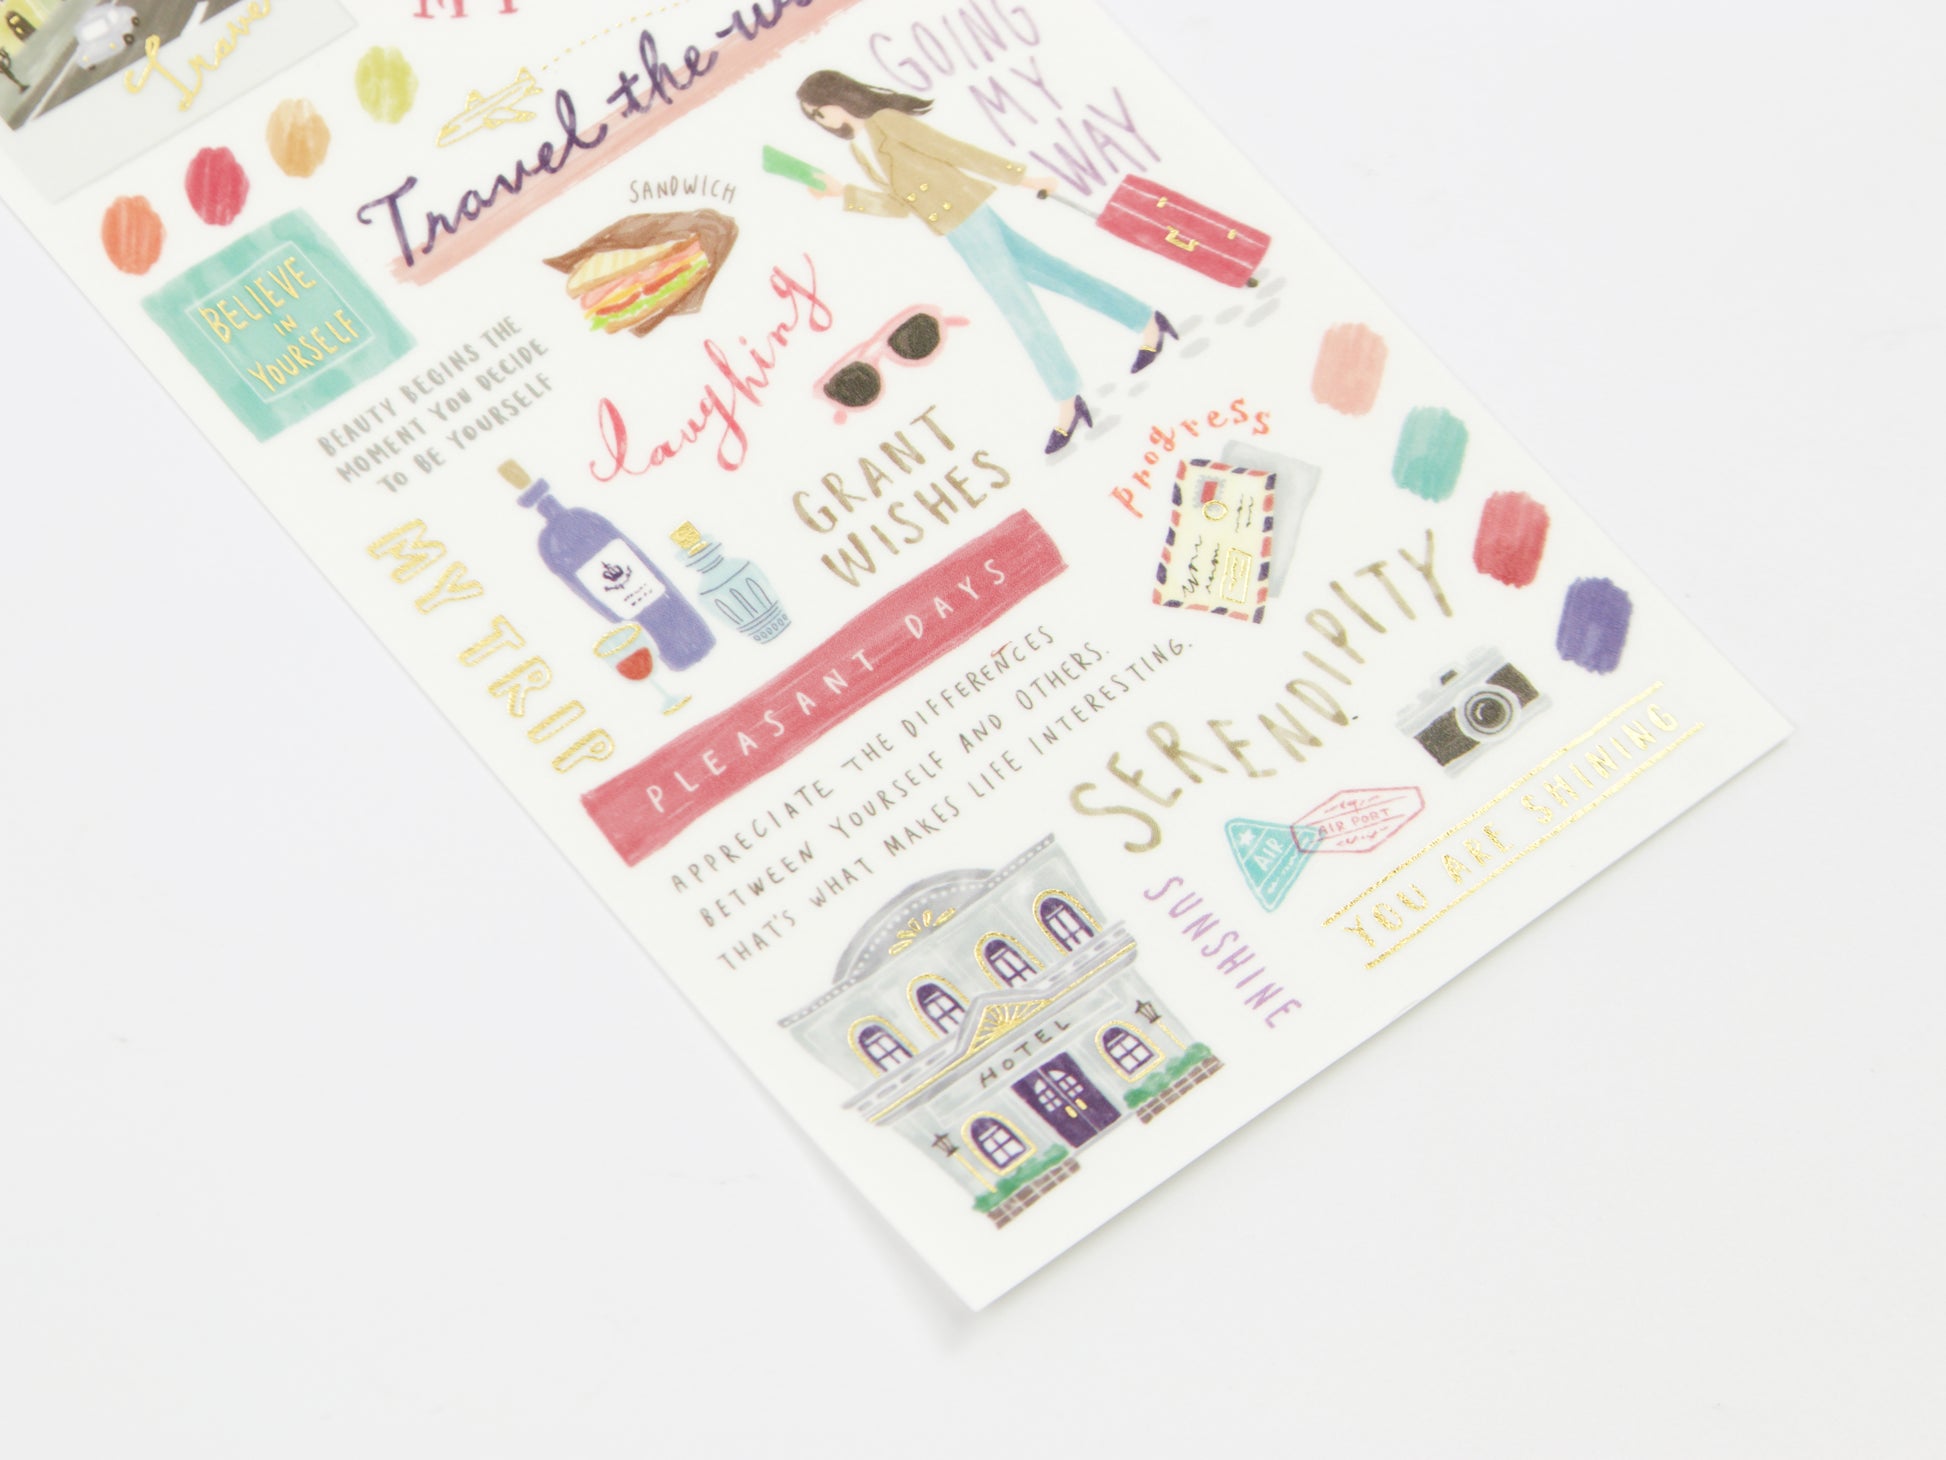 Mind Wave Sticker Sheet My Diary Sticker Cooking – Papermind Stationery